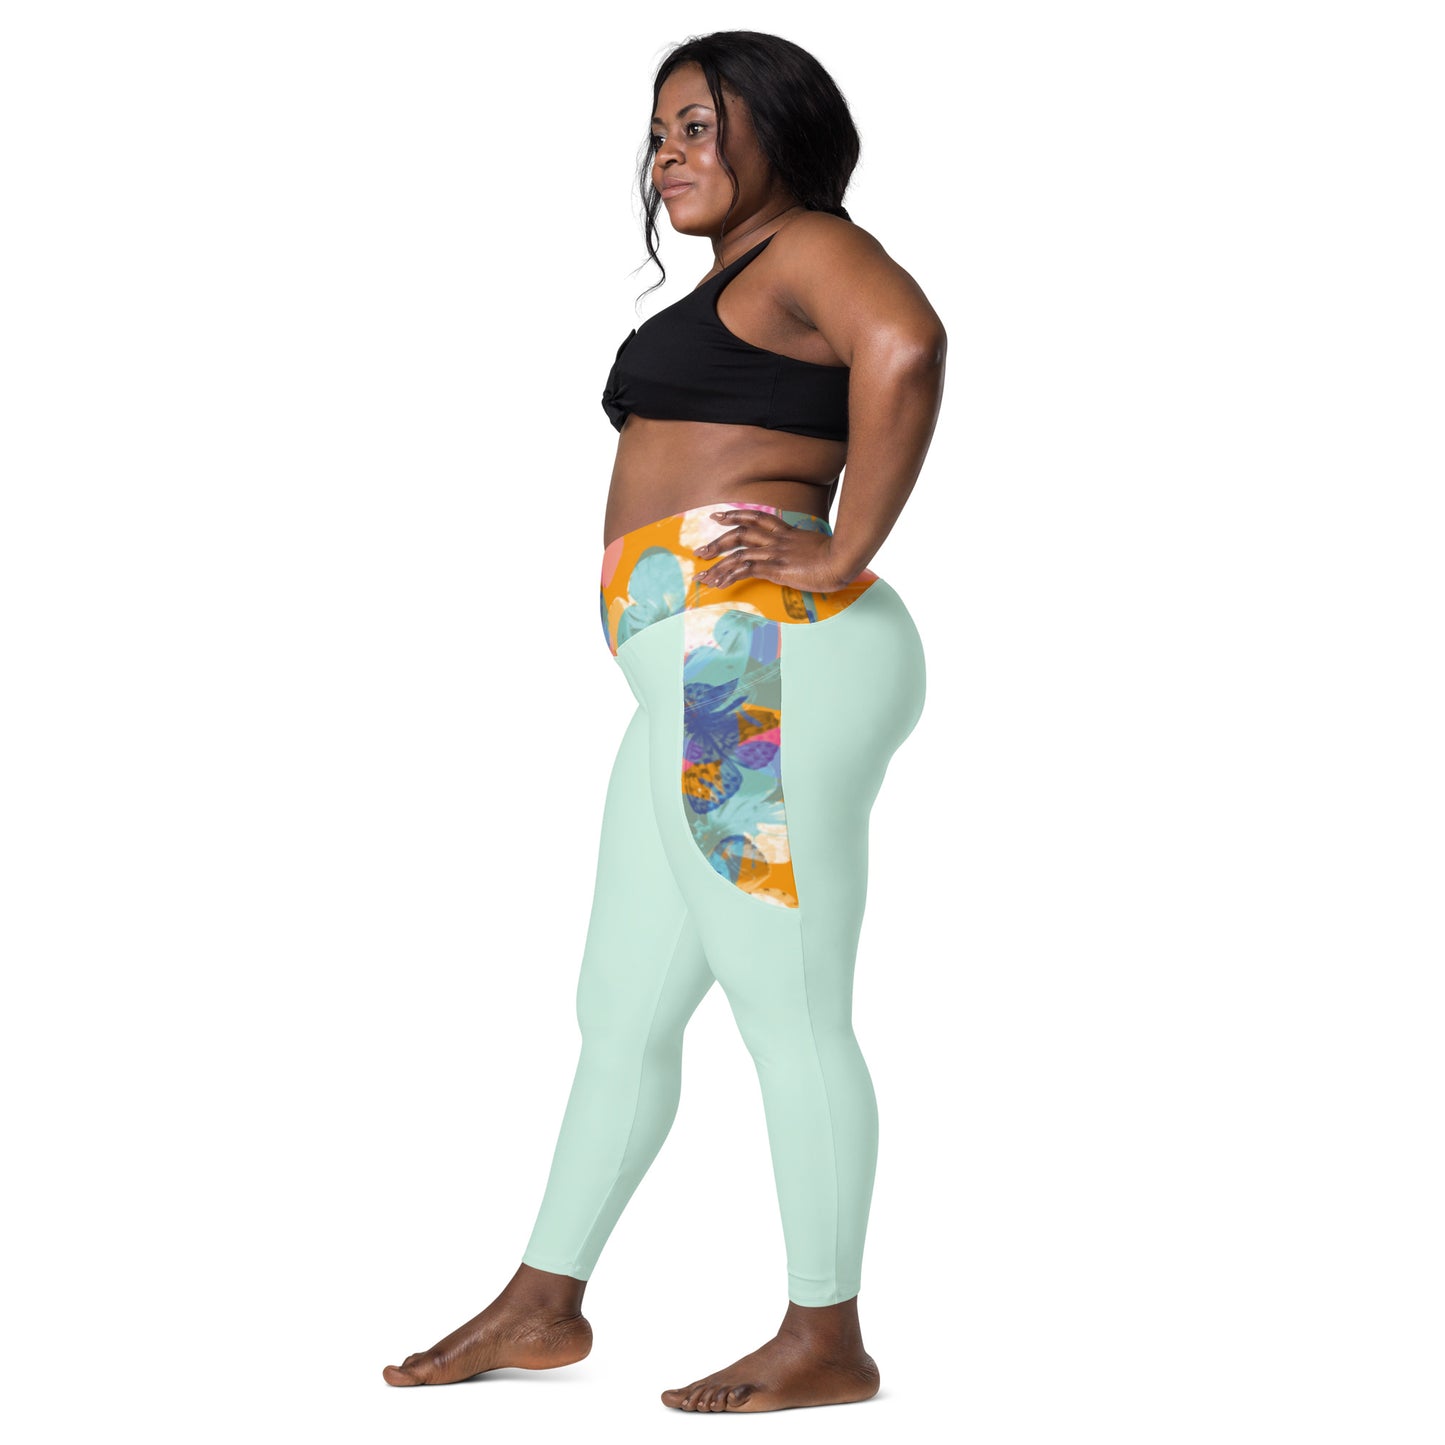 Humble Sportswear, women's high waist compression pocket leggings with butterfly print